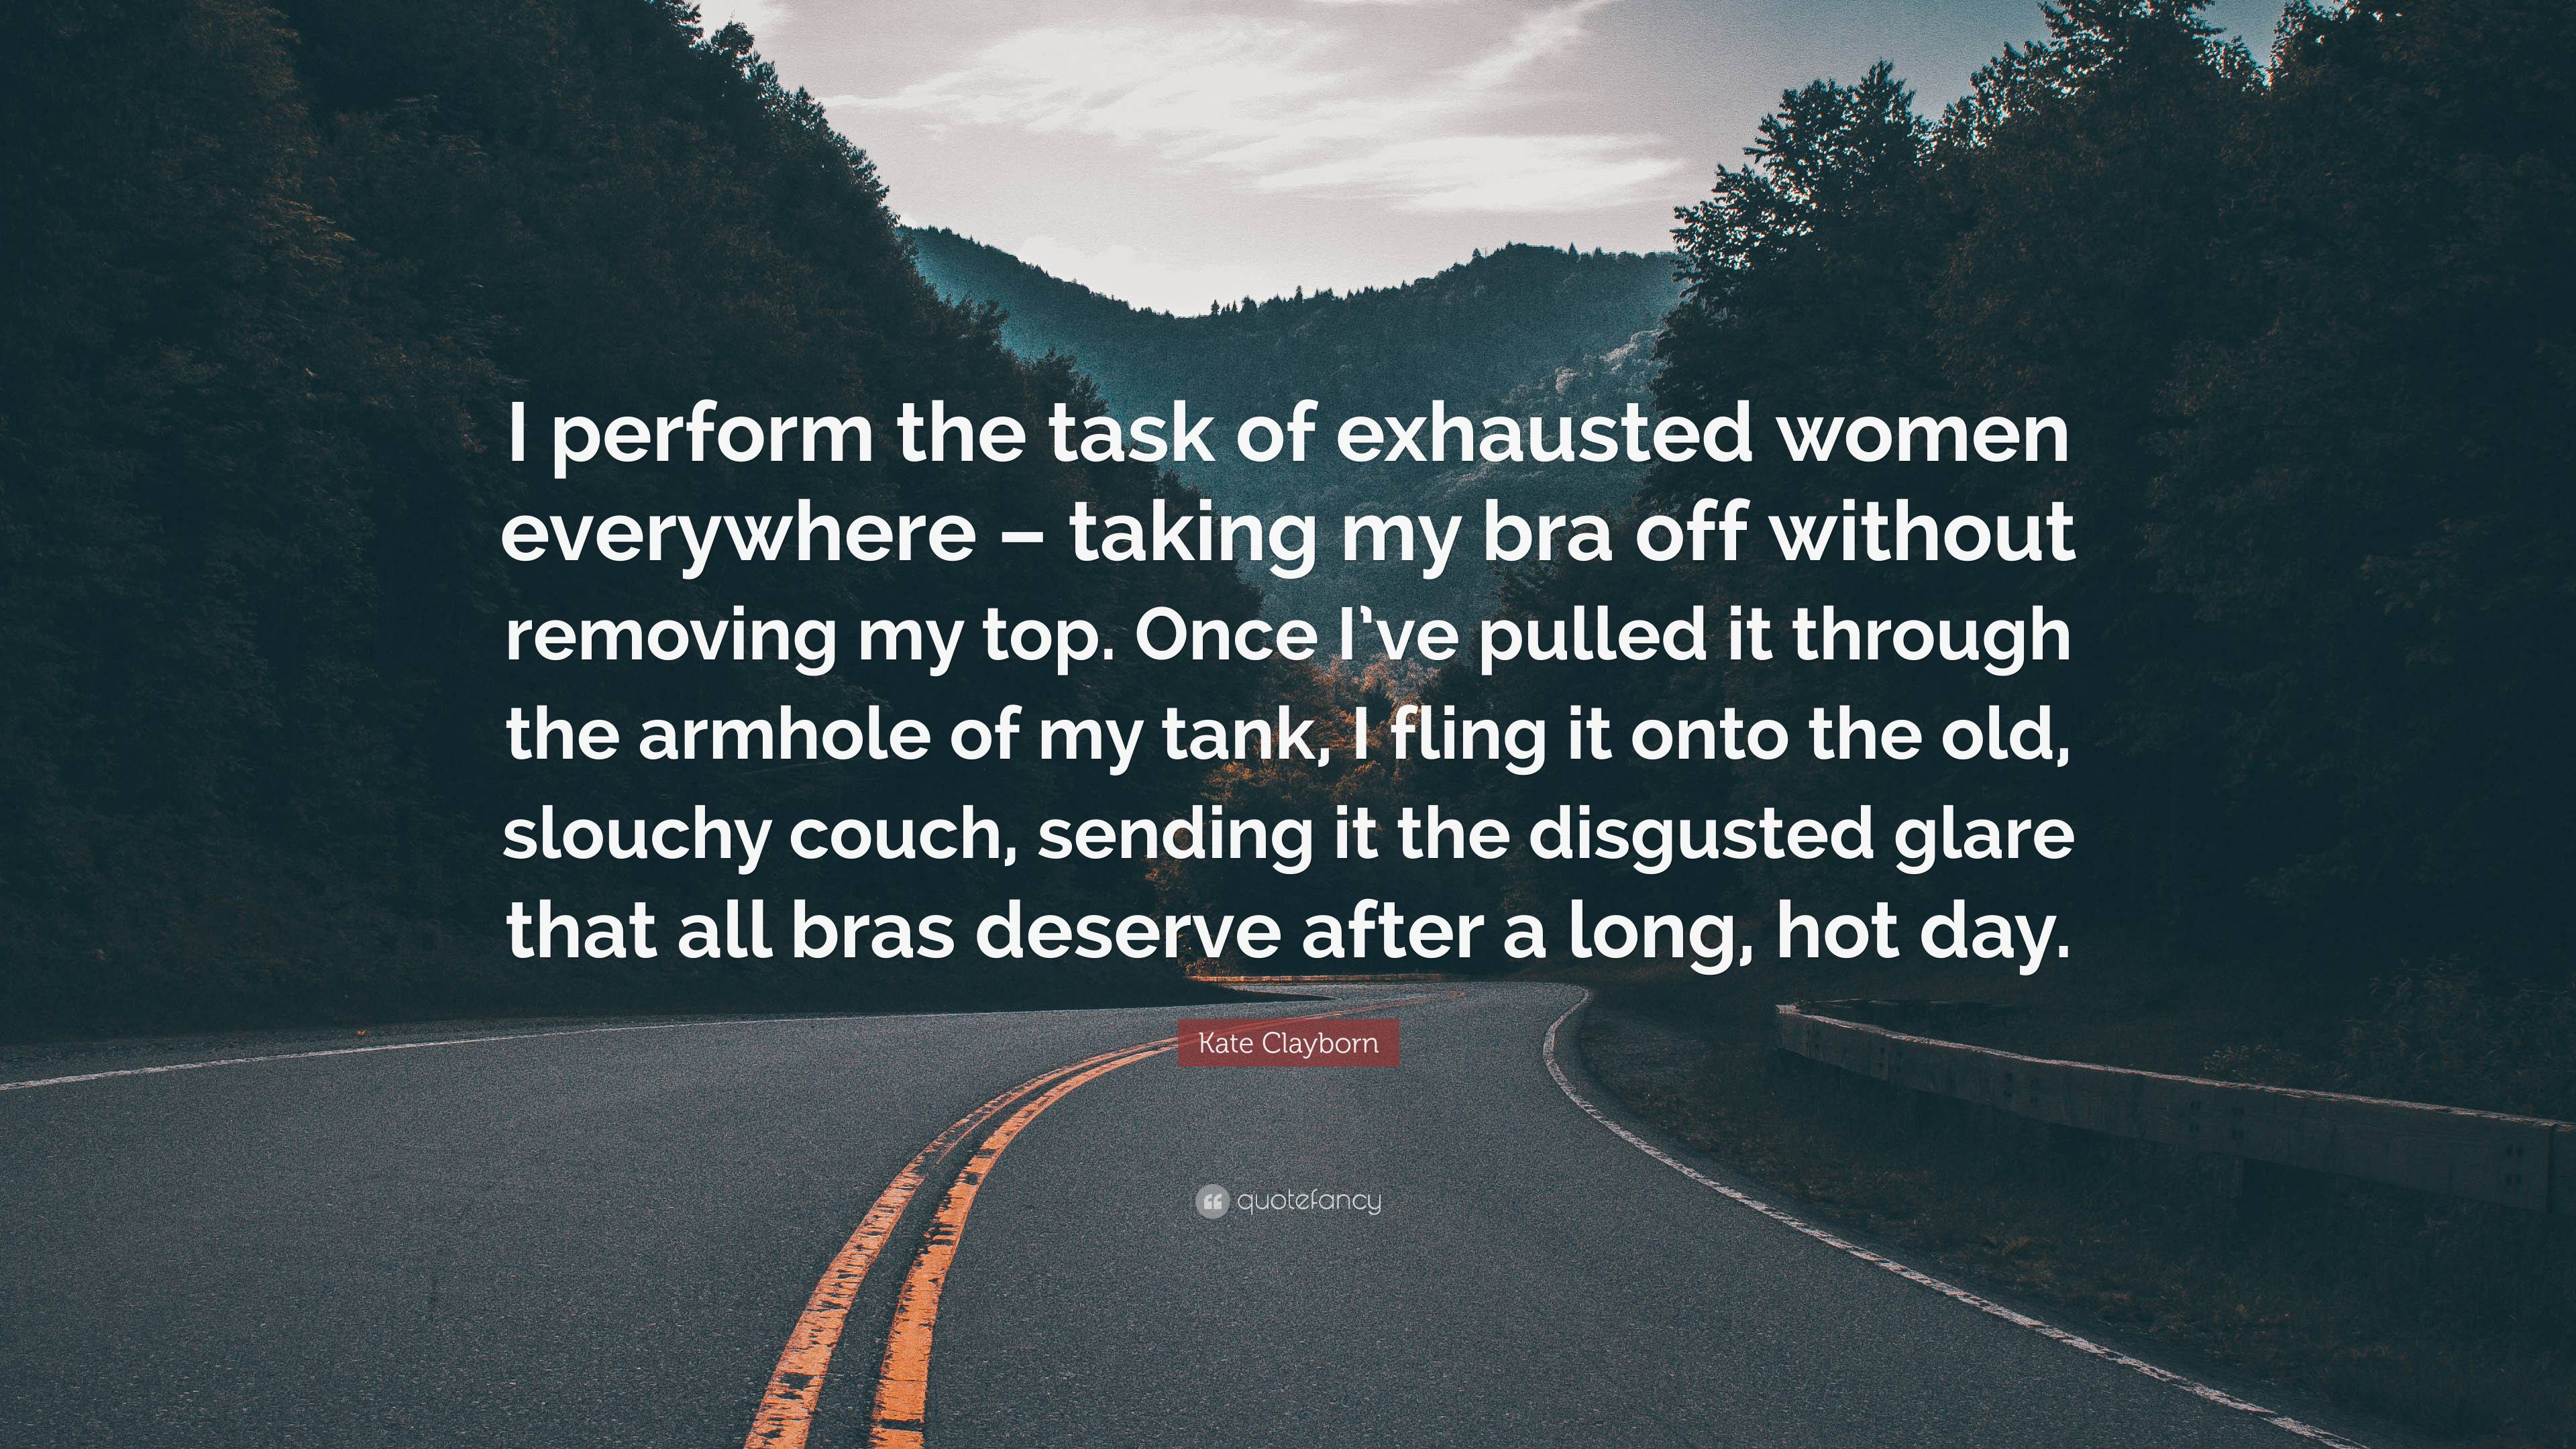 Kate Clayborn Quote: “I perform the task of exhausted women